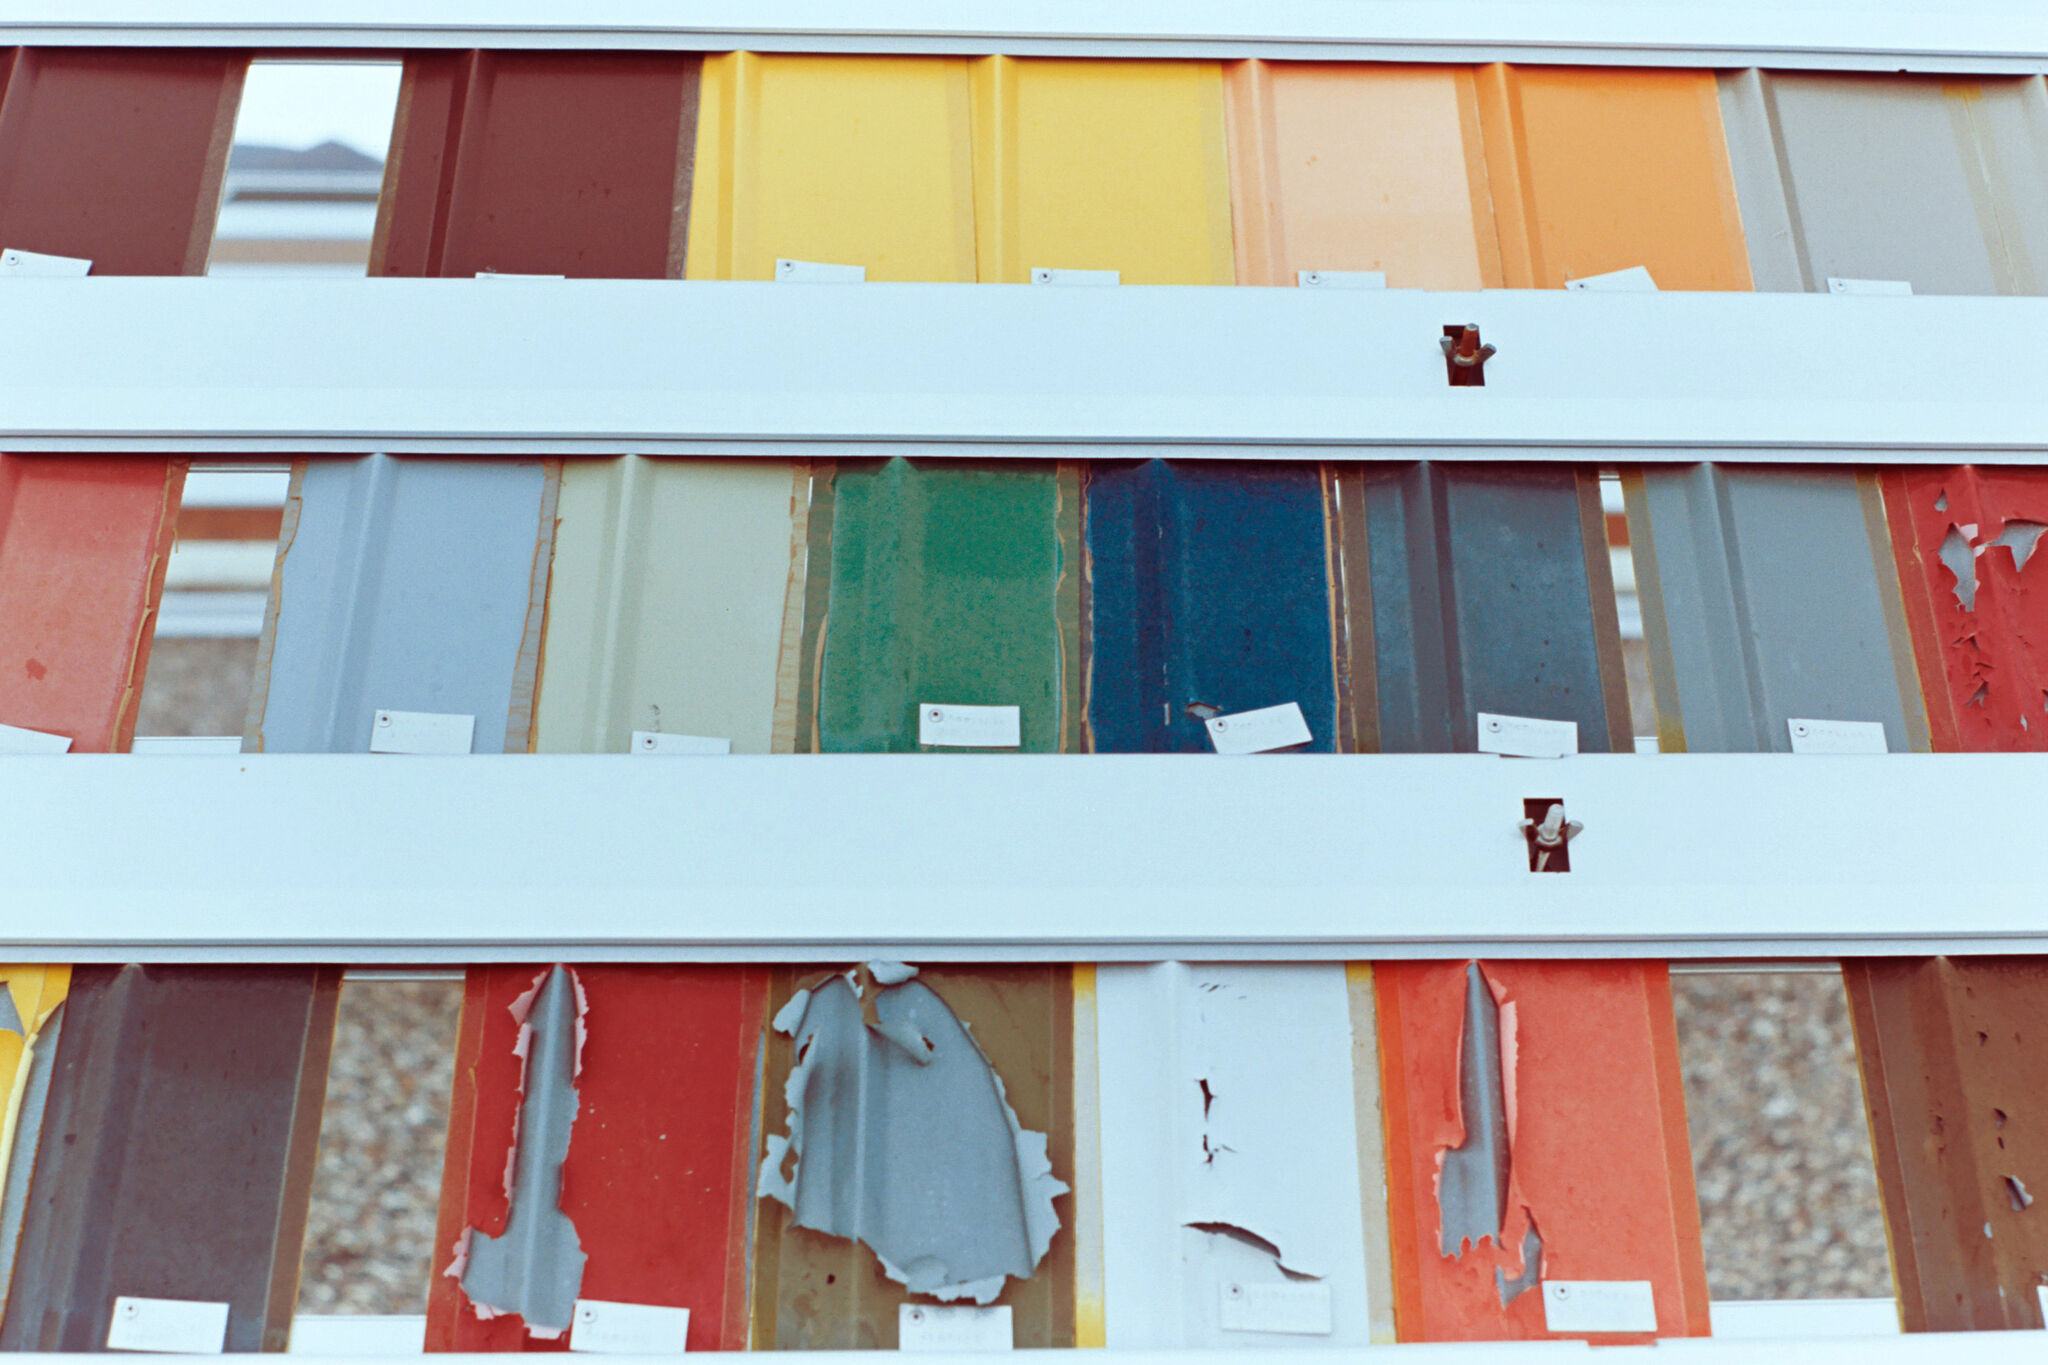 Panels of colorful, painted metal siding, some of which are damaged and peeling.